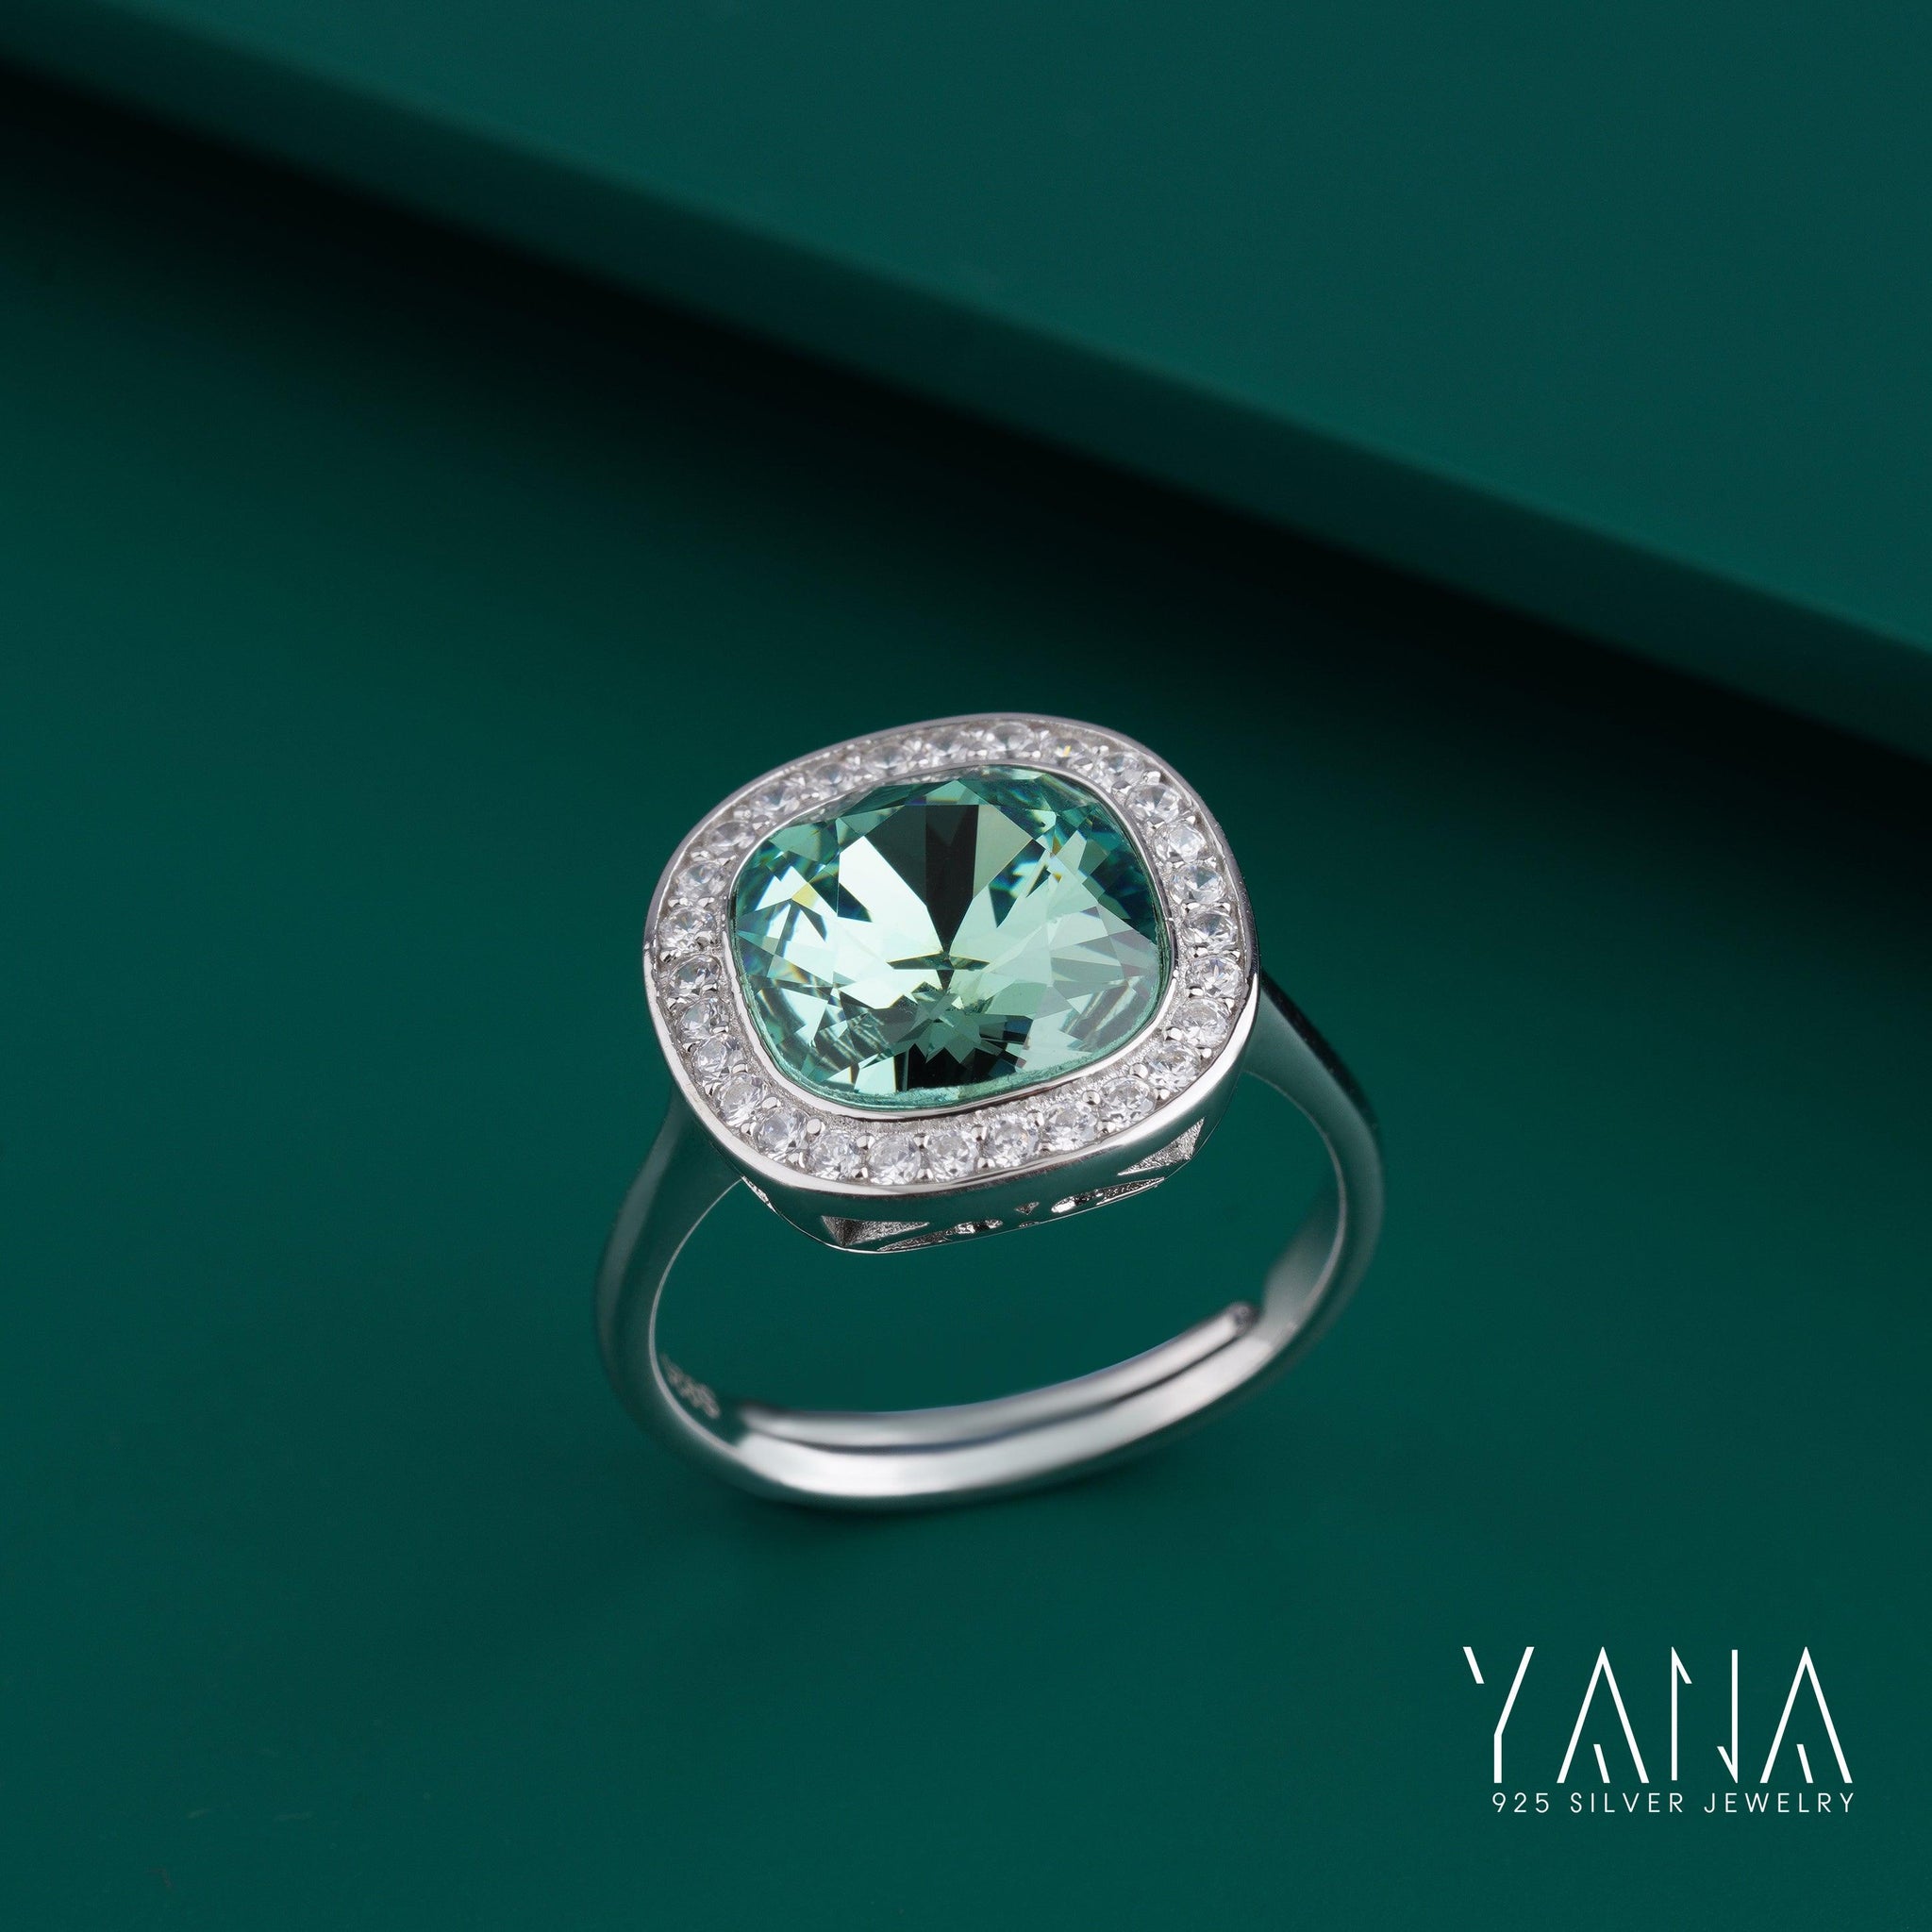 Dazzling Vivid Green Tourmaline Halo Setting Engagement Ring Gift For Her In 925 Silver - YANA SILVER